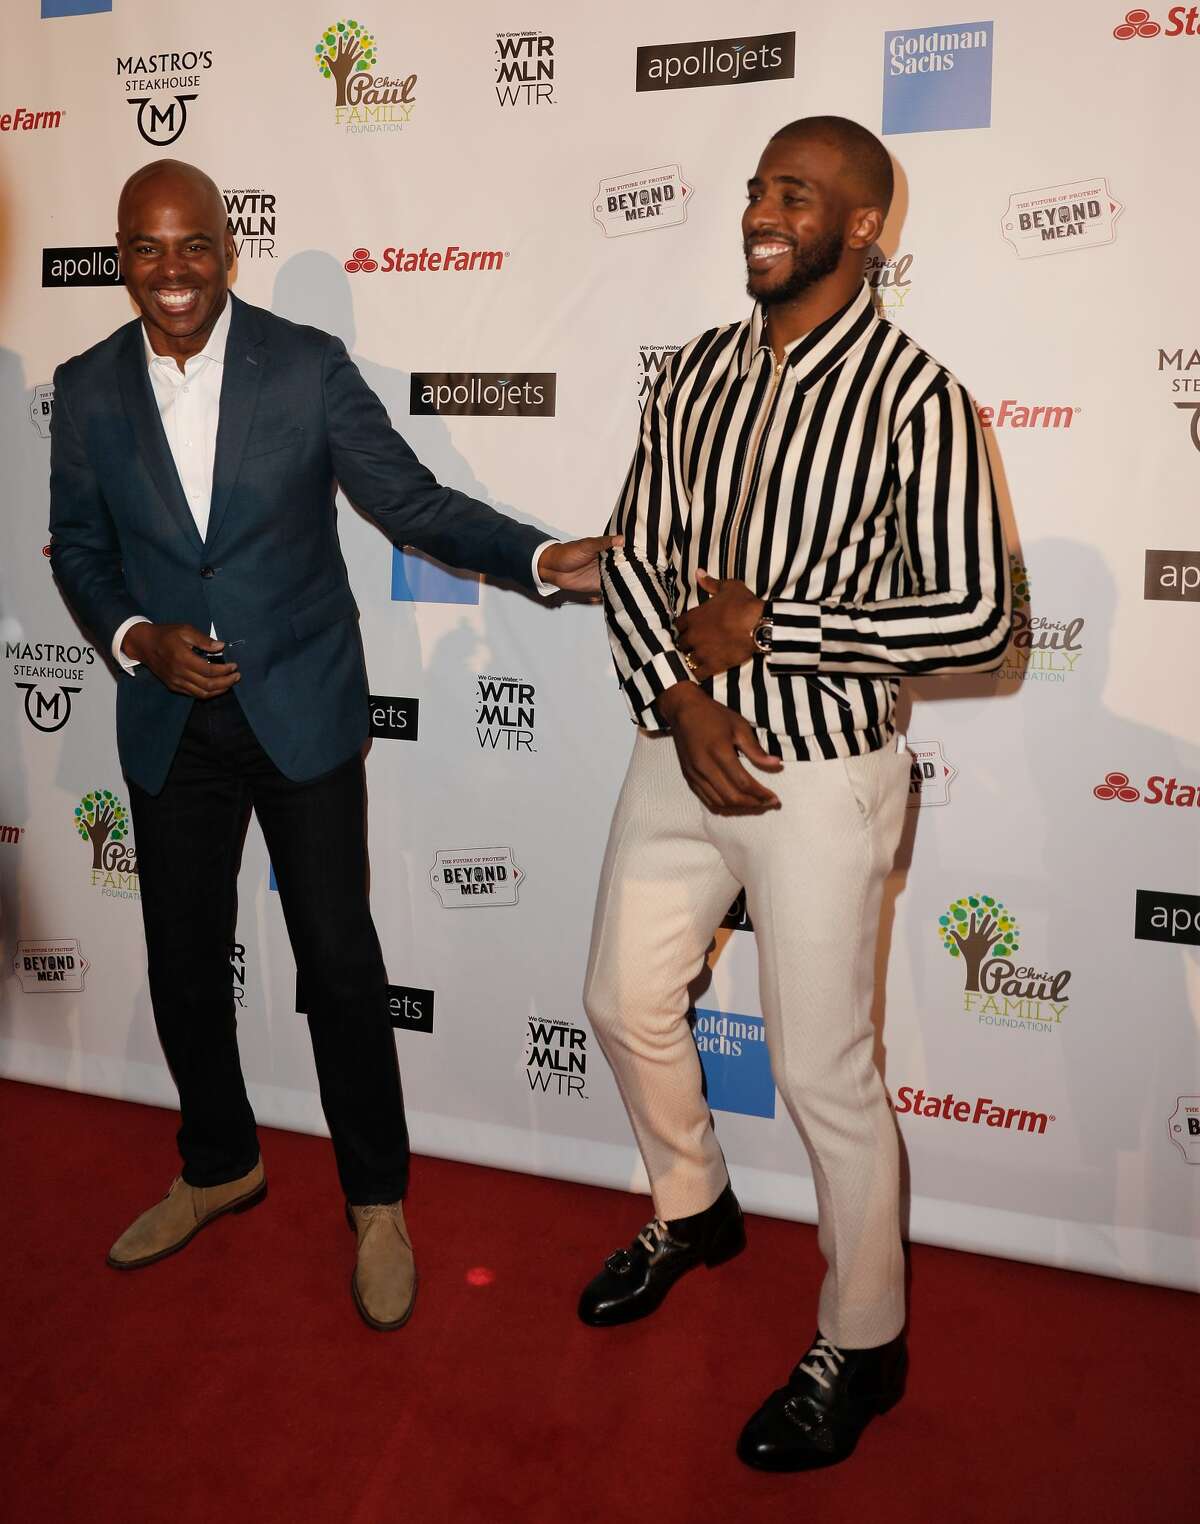 HOUSTON, TX - OCTOBER 28: Kevin Frazier and Chris Paul at the Chris Paul Family Foundation's "Celebrity Server" Fundraiser at Mastro's Steakhouse on October 28, 2018 in Houston, Texas. (Photo by Bob Levey/Getty Images)